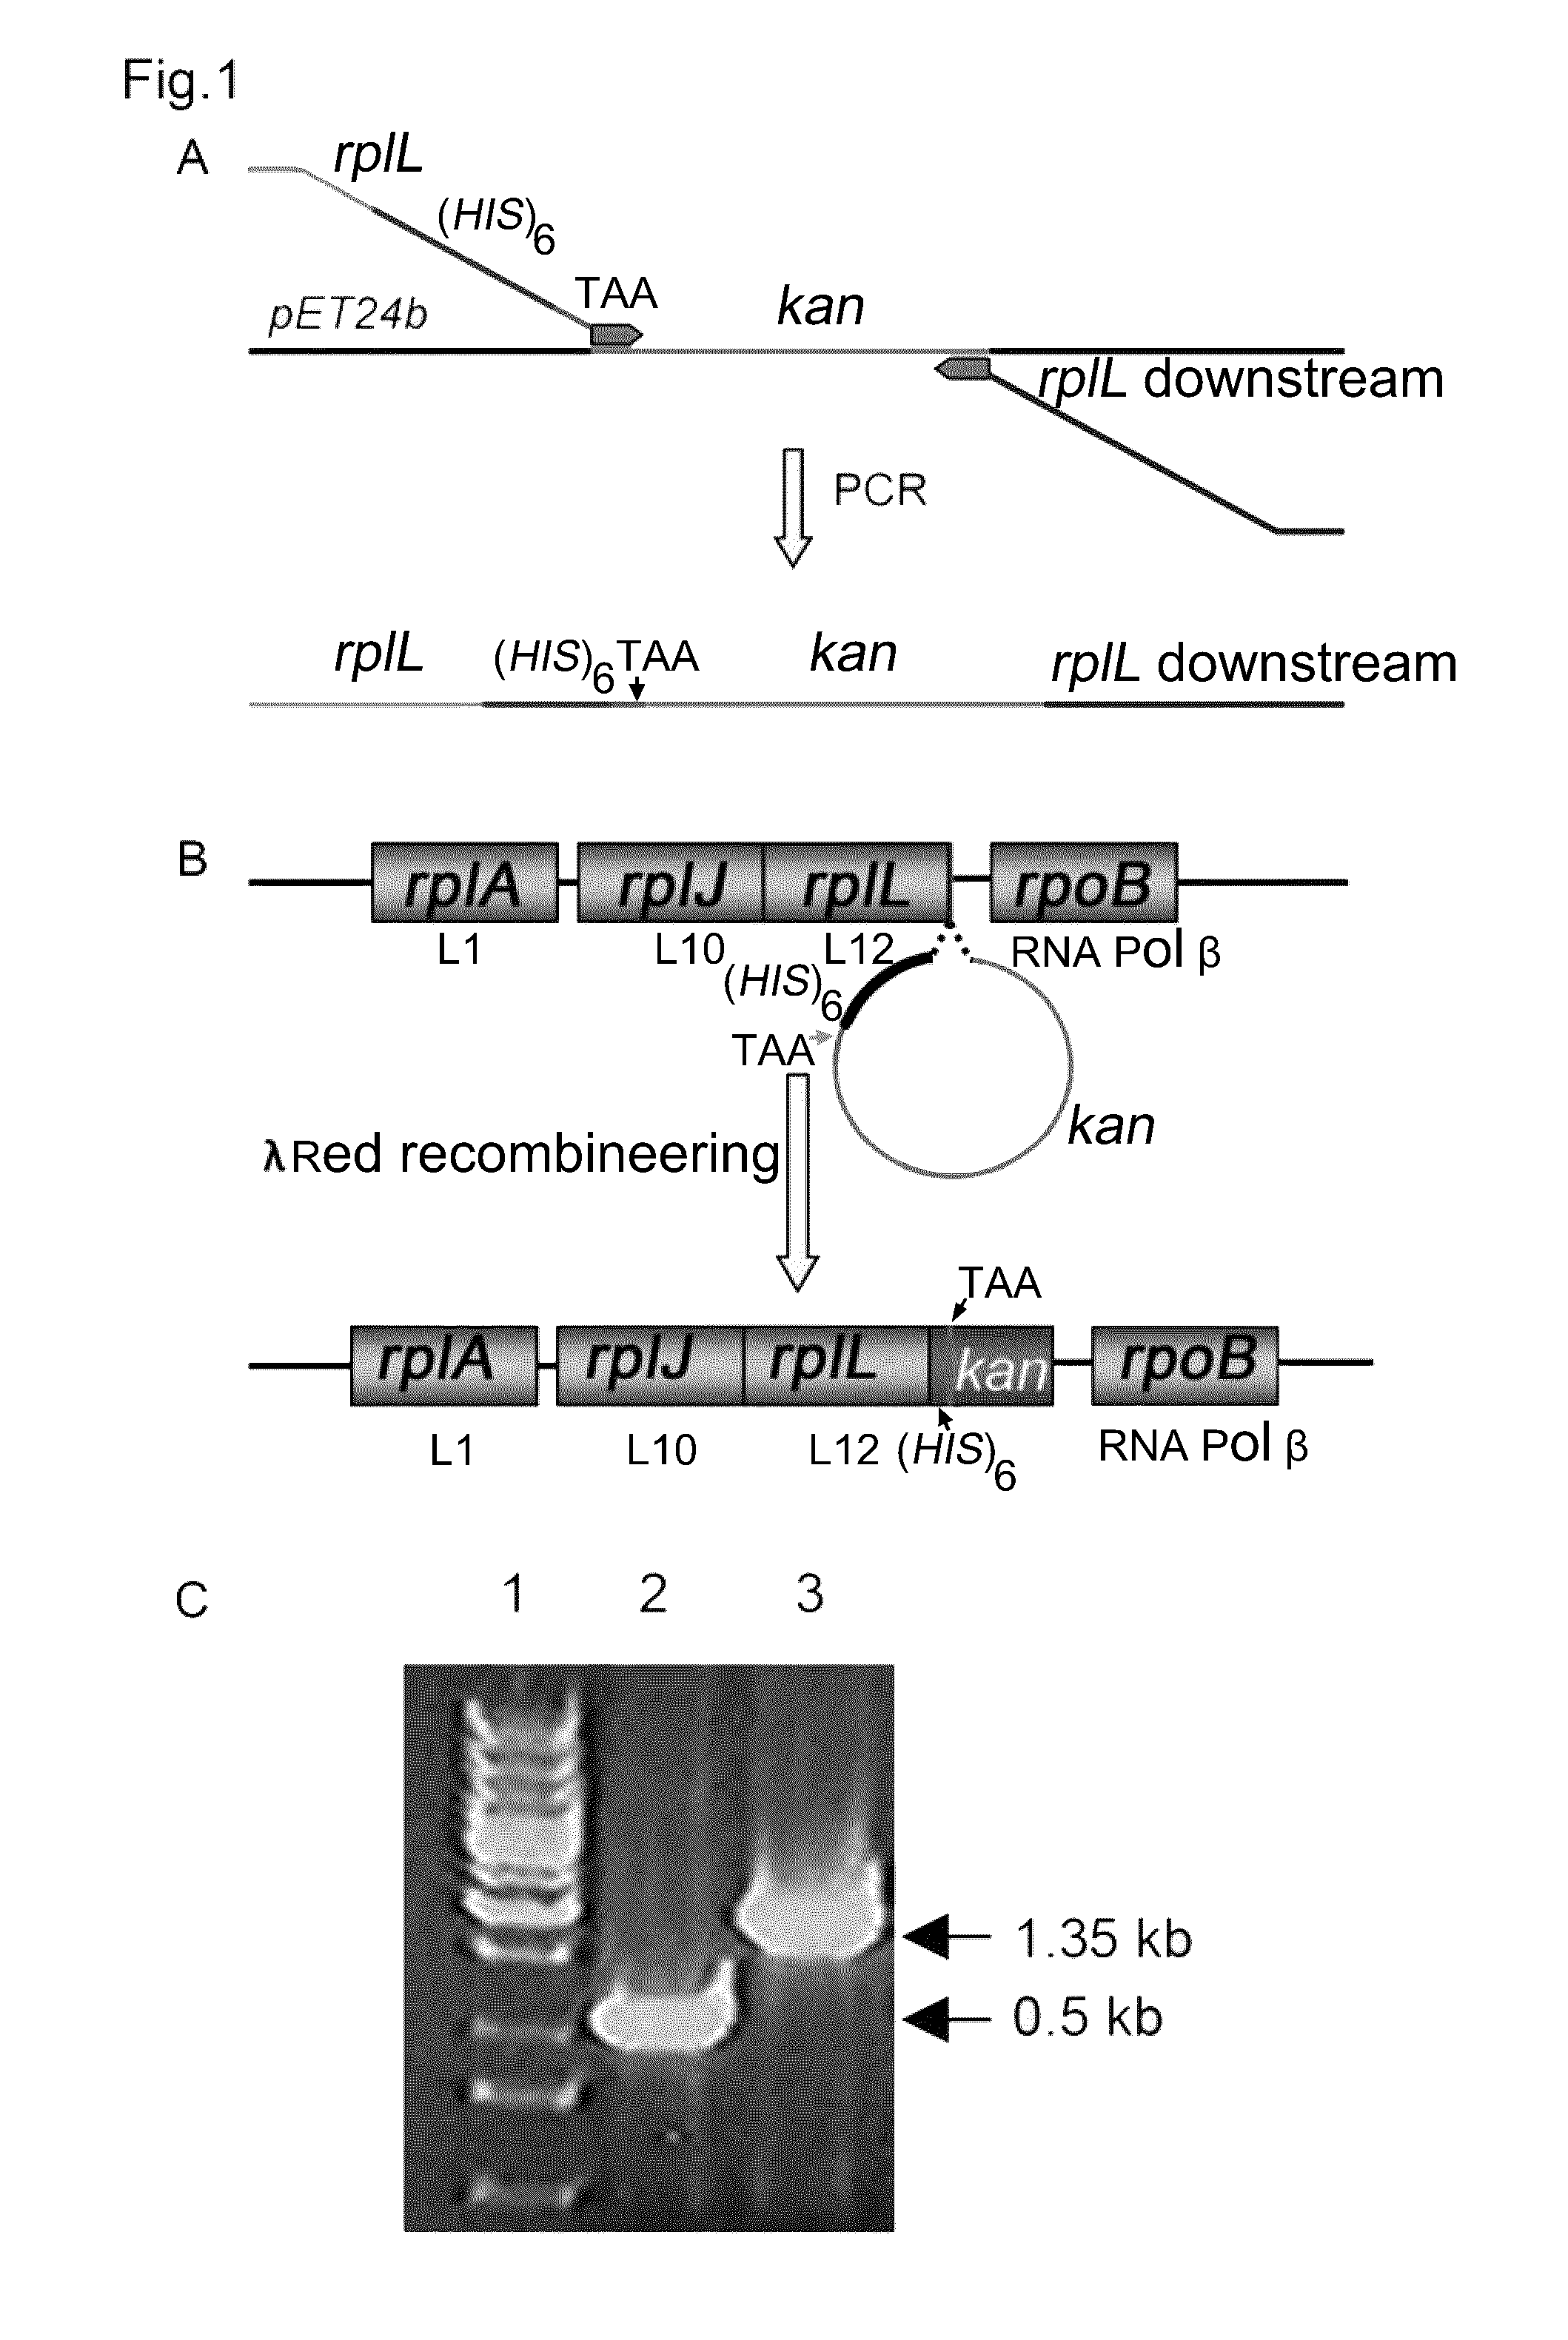 Method for production and purification of macromolecular complexes